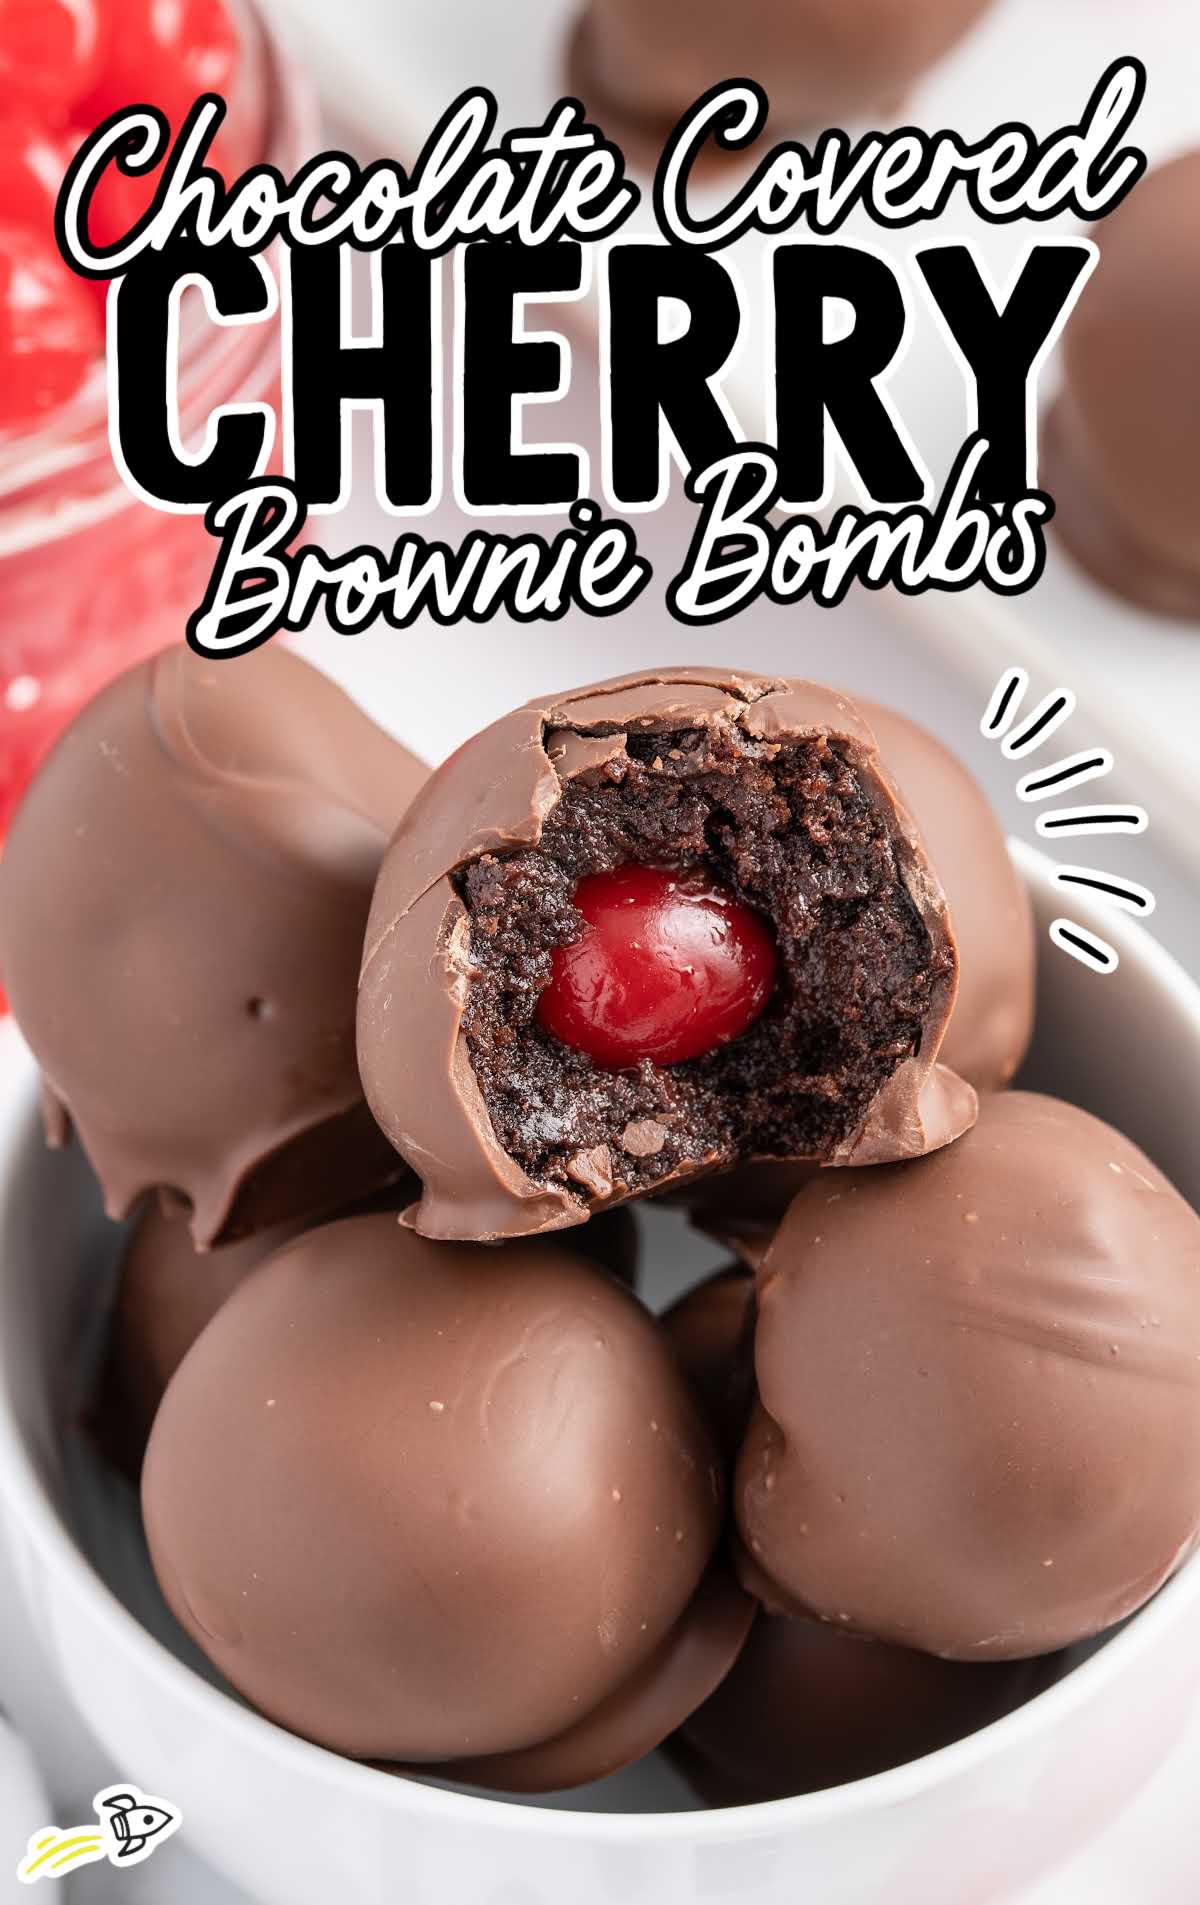 close up shot of a bowl of Chocolate Covered Cherry Brownie Bombs with a bite taken out of one of the brownie bombs